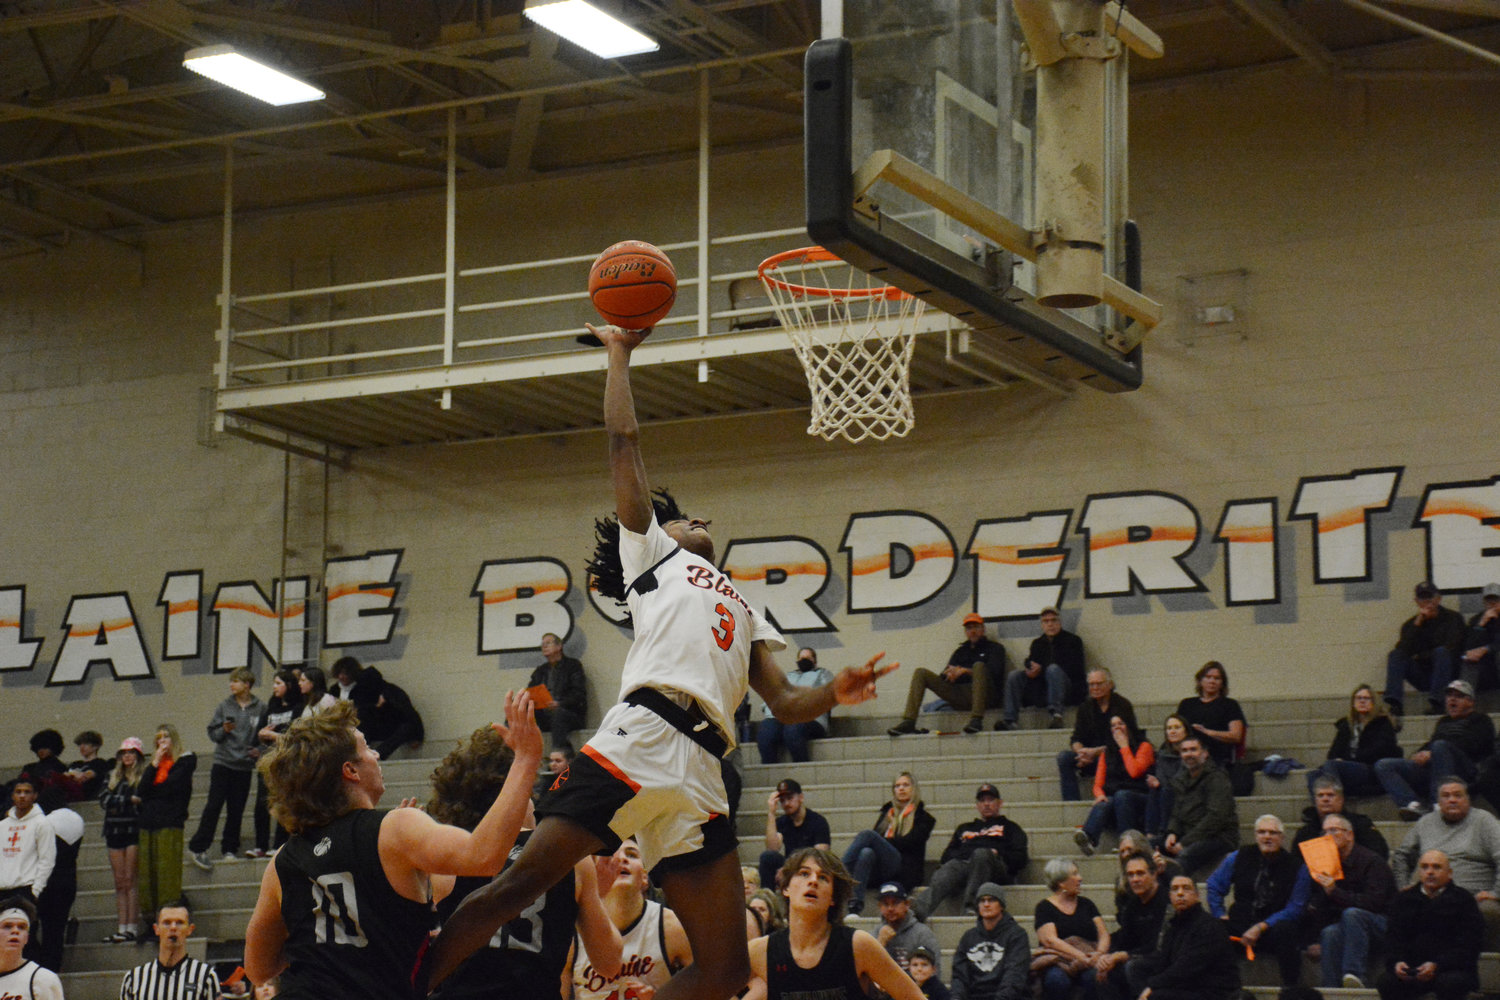 Senior Matthew Russ goes up for a layup in Blaine’s 60-49 win over Bellingham High School December 5.